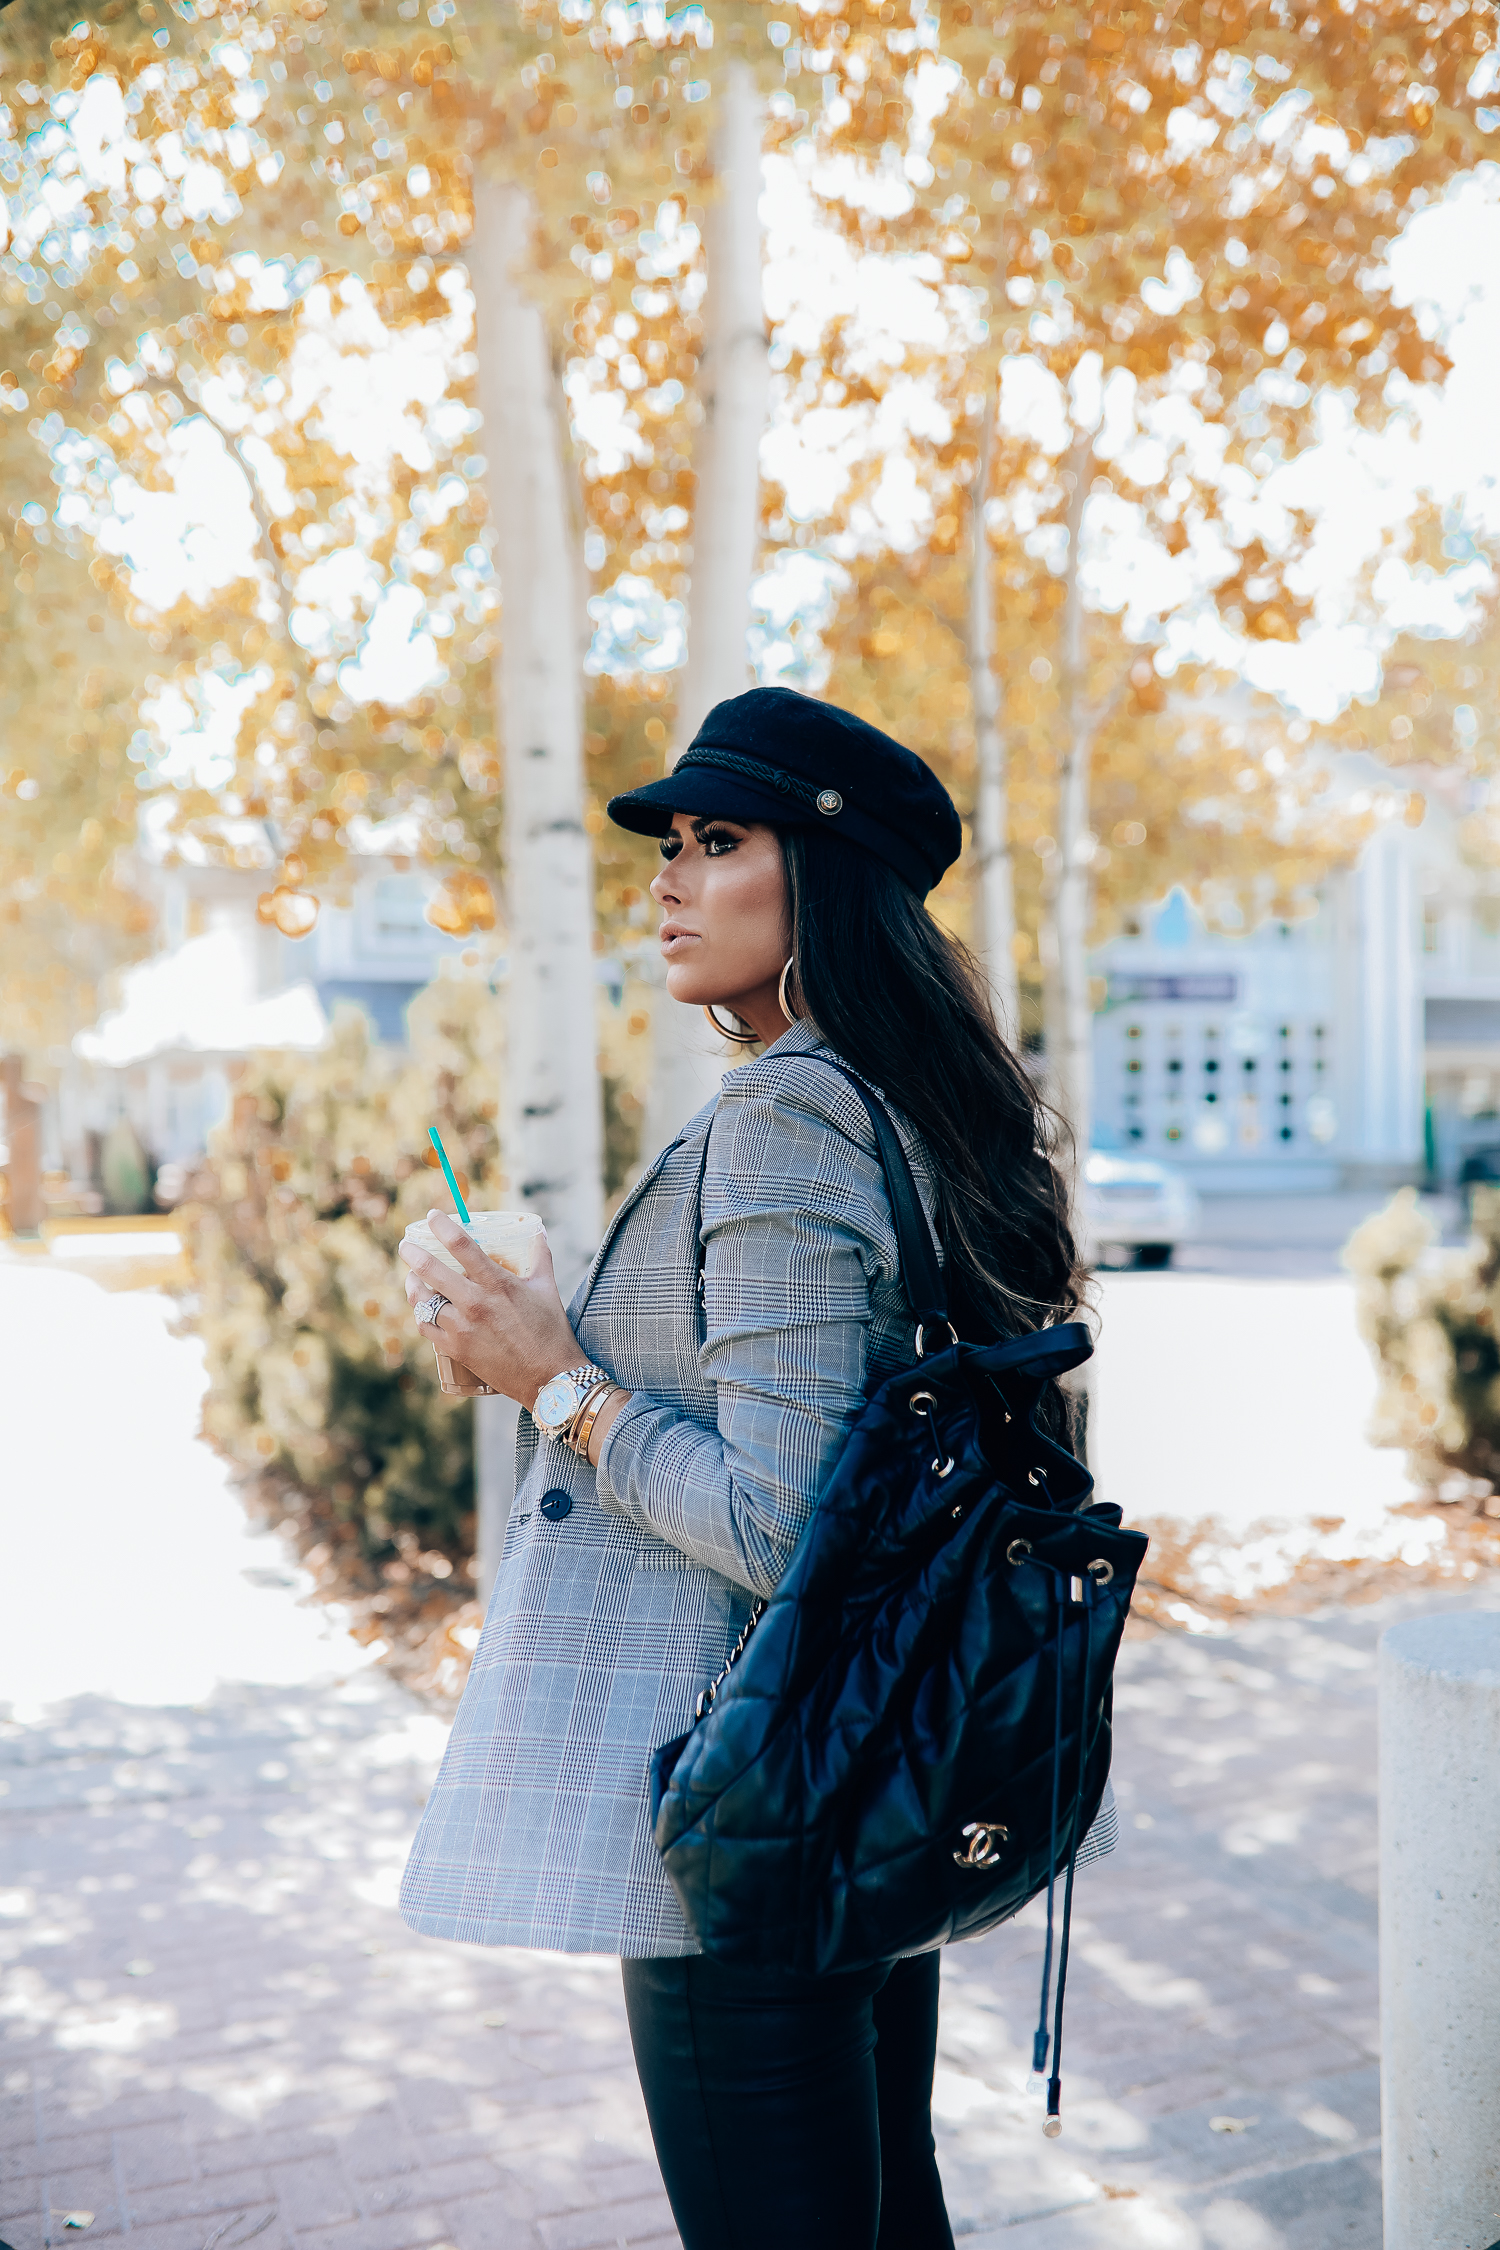 Oversized plaid blazer styled for Fall by top US fashion blog, The Sweetest Thing: image of a woman wearing an Aqua oversized plaid blazer, Splendid long sleeve top, BlankNYC vegan leggings, Marc Fisher booties, Chanel backpack, Baker boy cap, a Rolex watch, Argento Vivo earrings, and Cartier bracelets | fall fashion outfits pinterest 2019, plaid blazer outfit fall, leather pants outfit fall, how to style a plaid blazer fall trends 2019, emily ann gemma-19